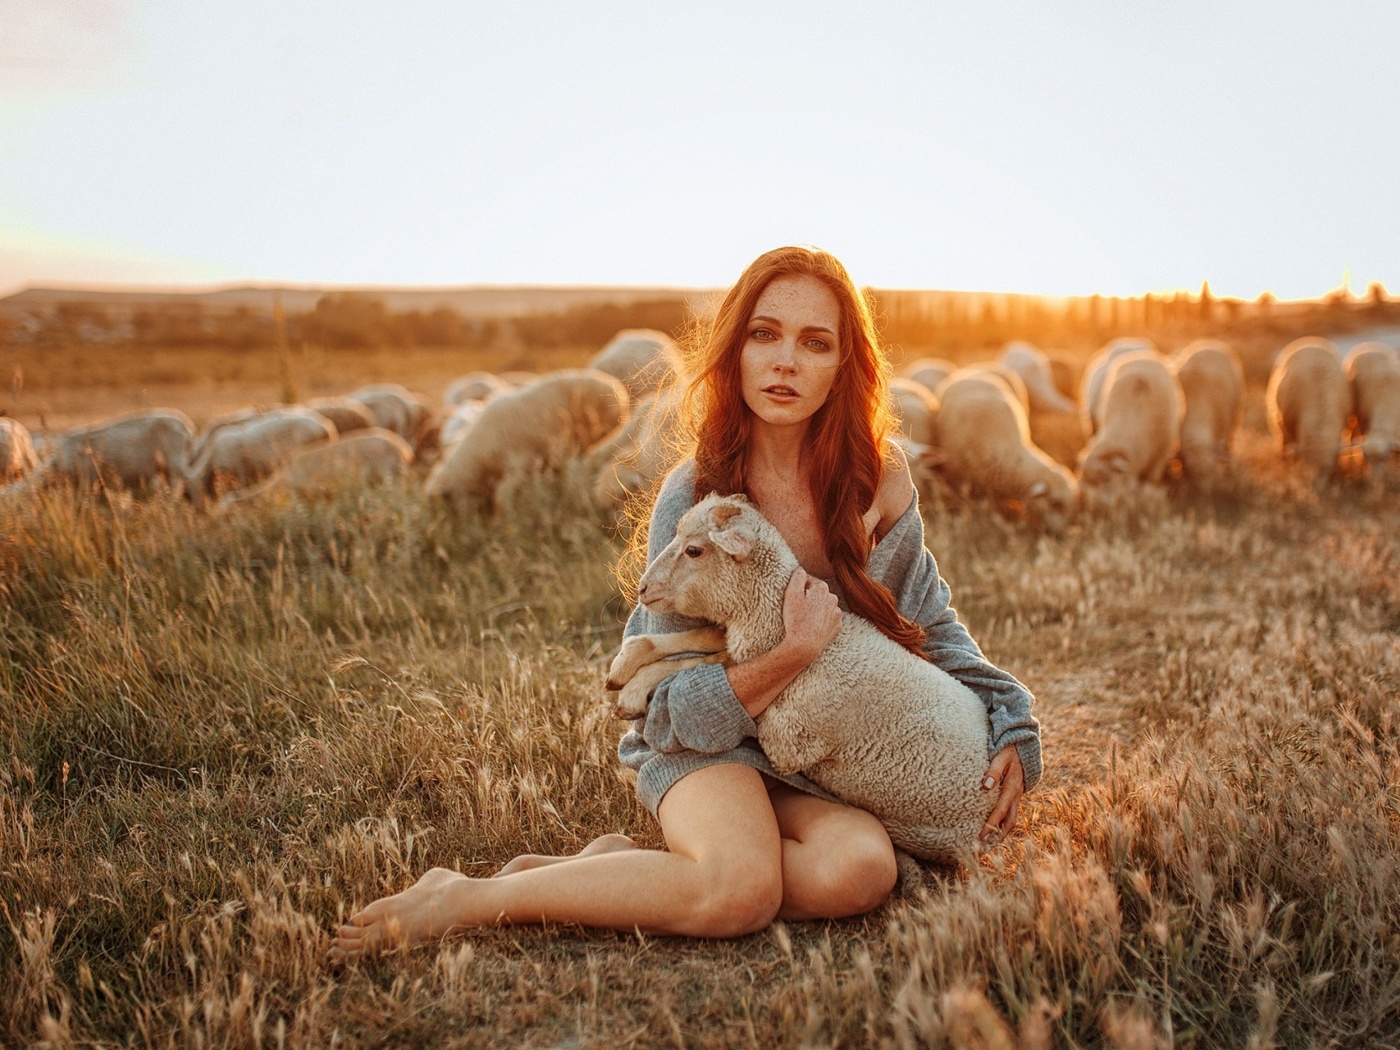 Girl with Sheep wallpaper 1400x1050